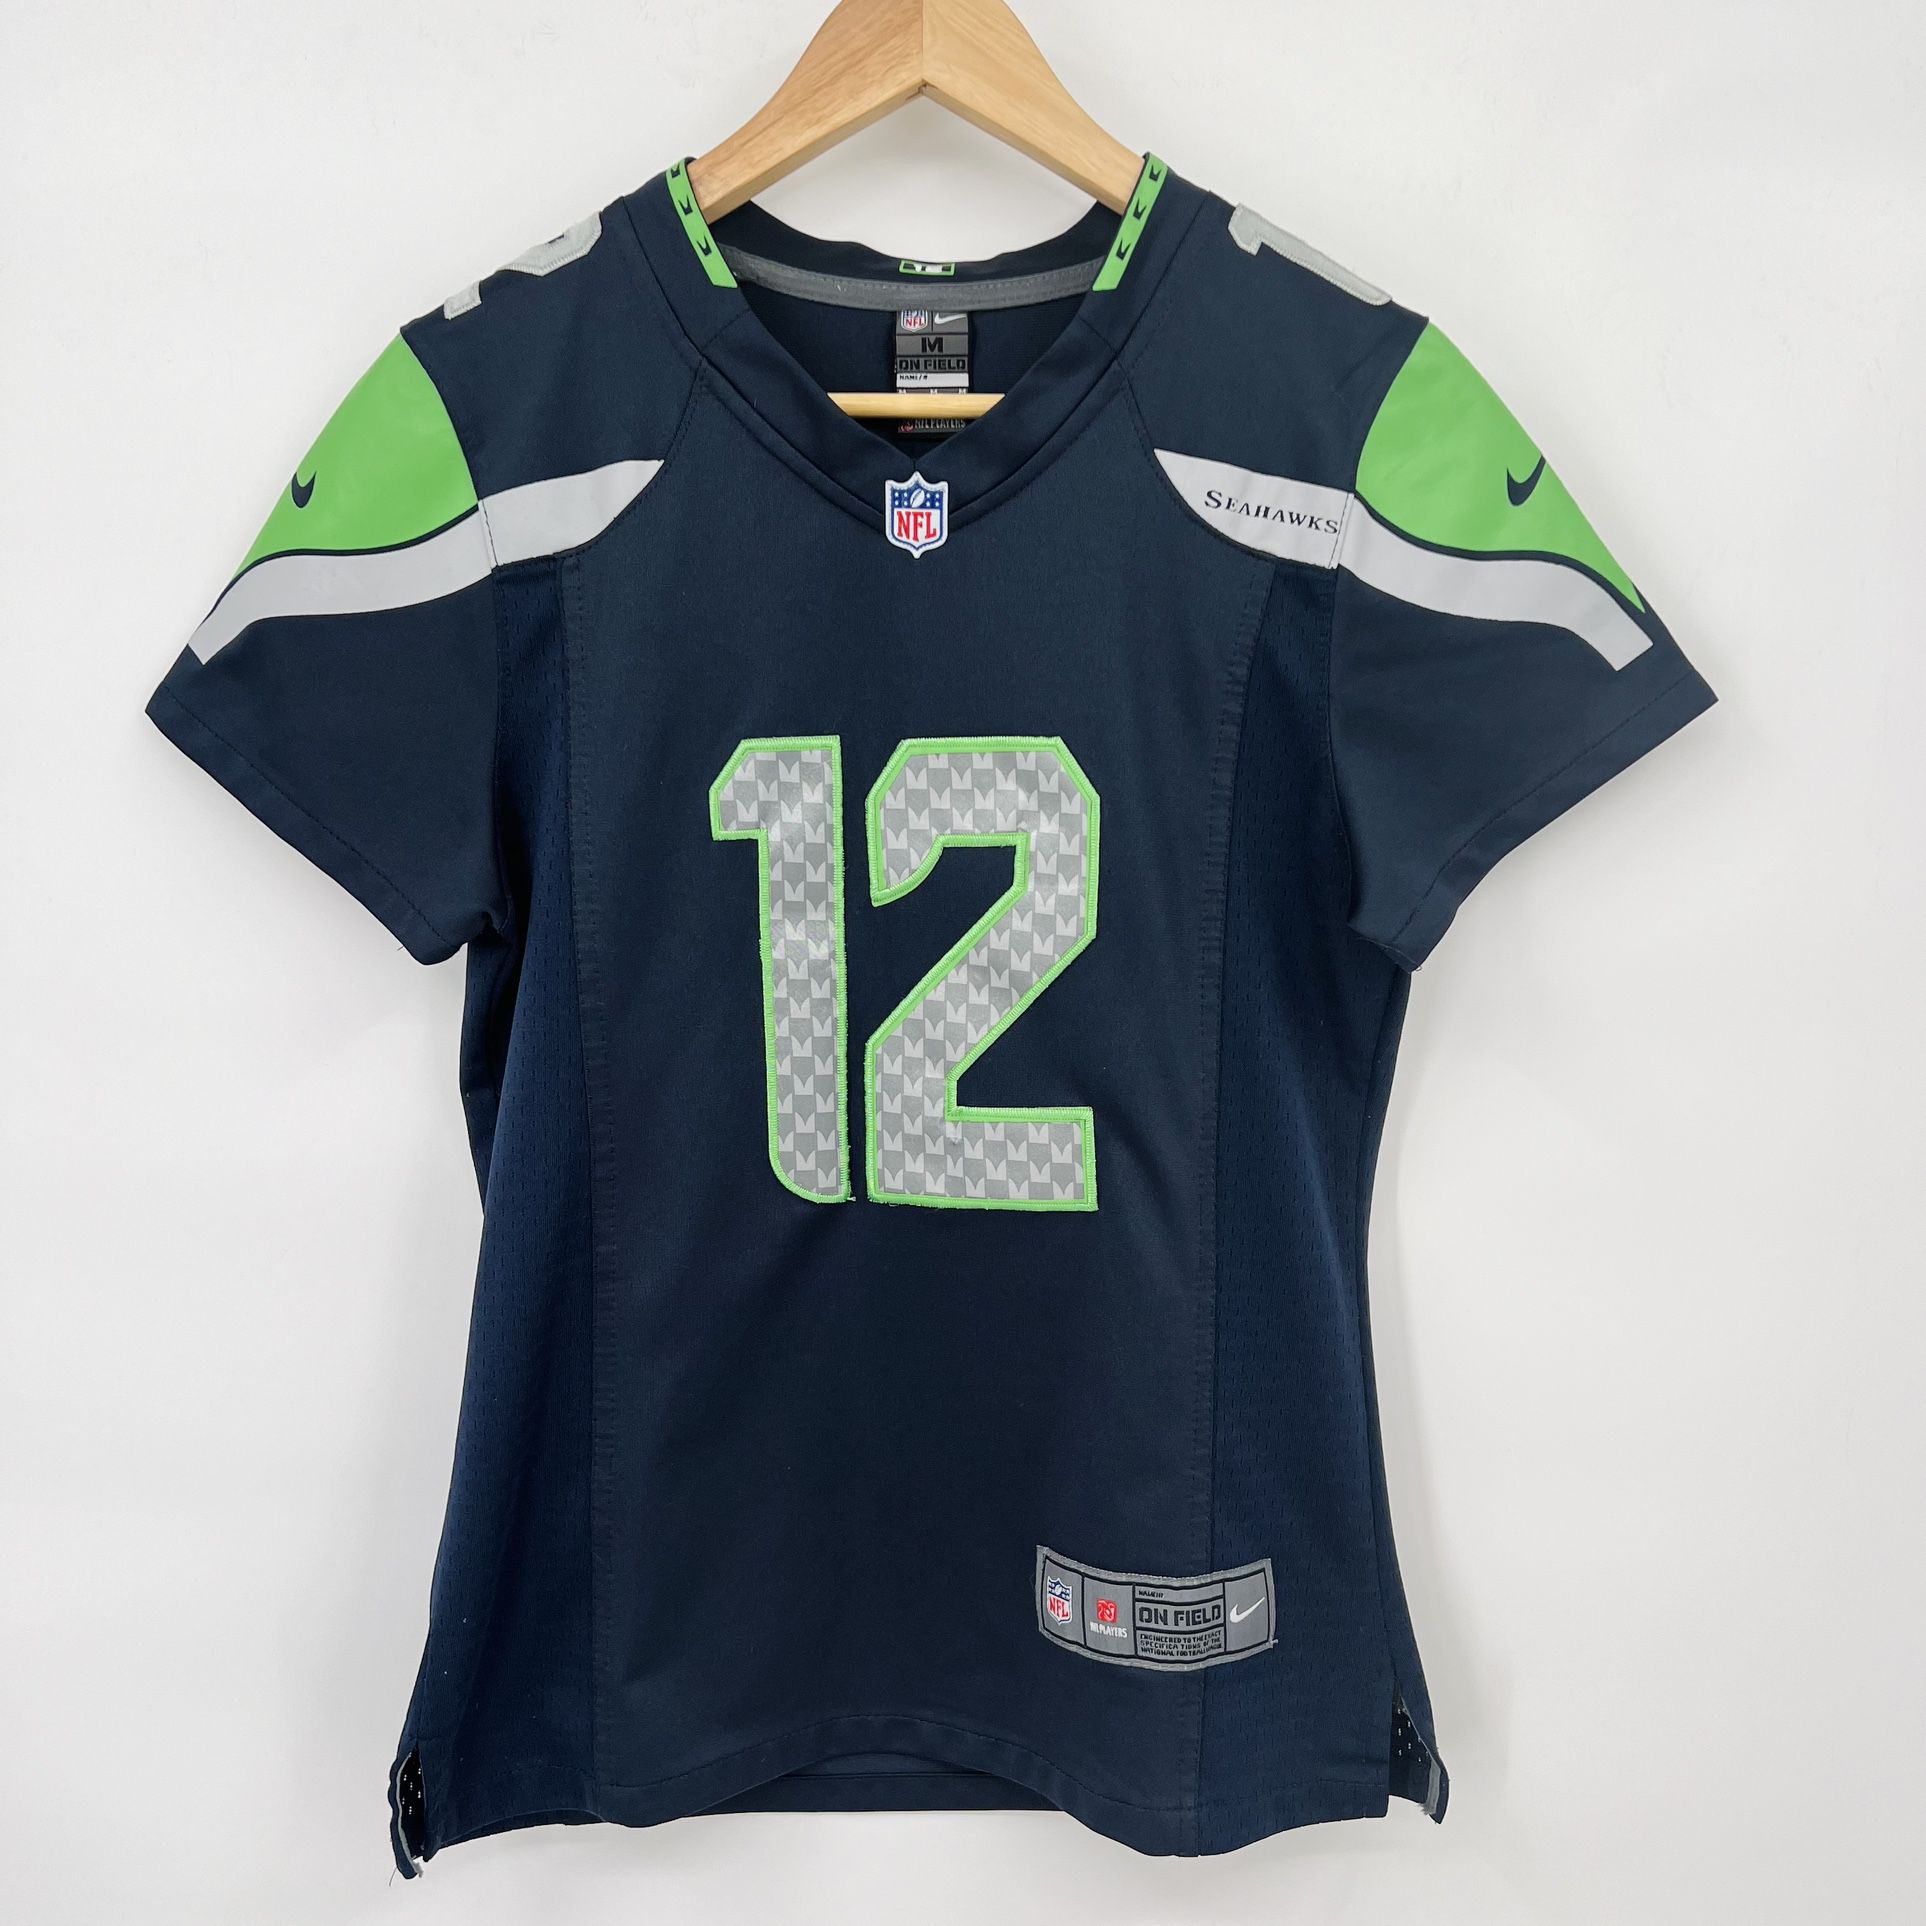 Seahawks NFL On Field Women's Embroidered Jersey 12th Man Size Medium